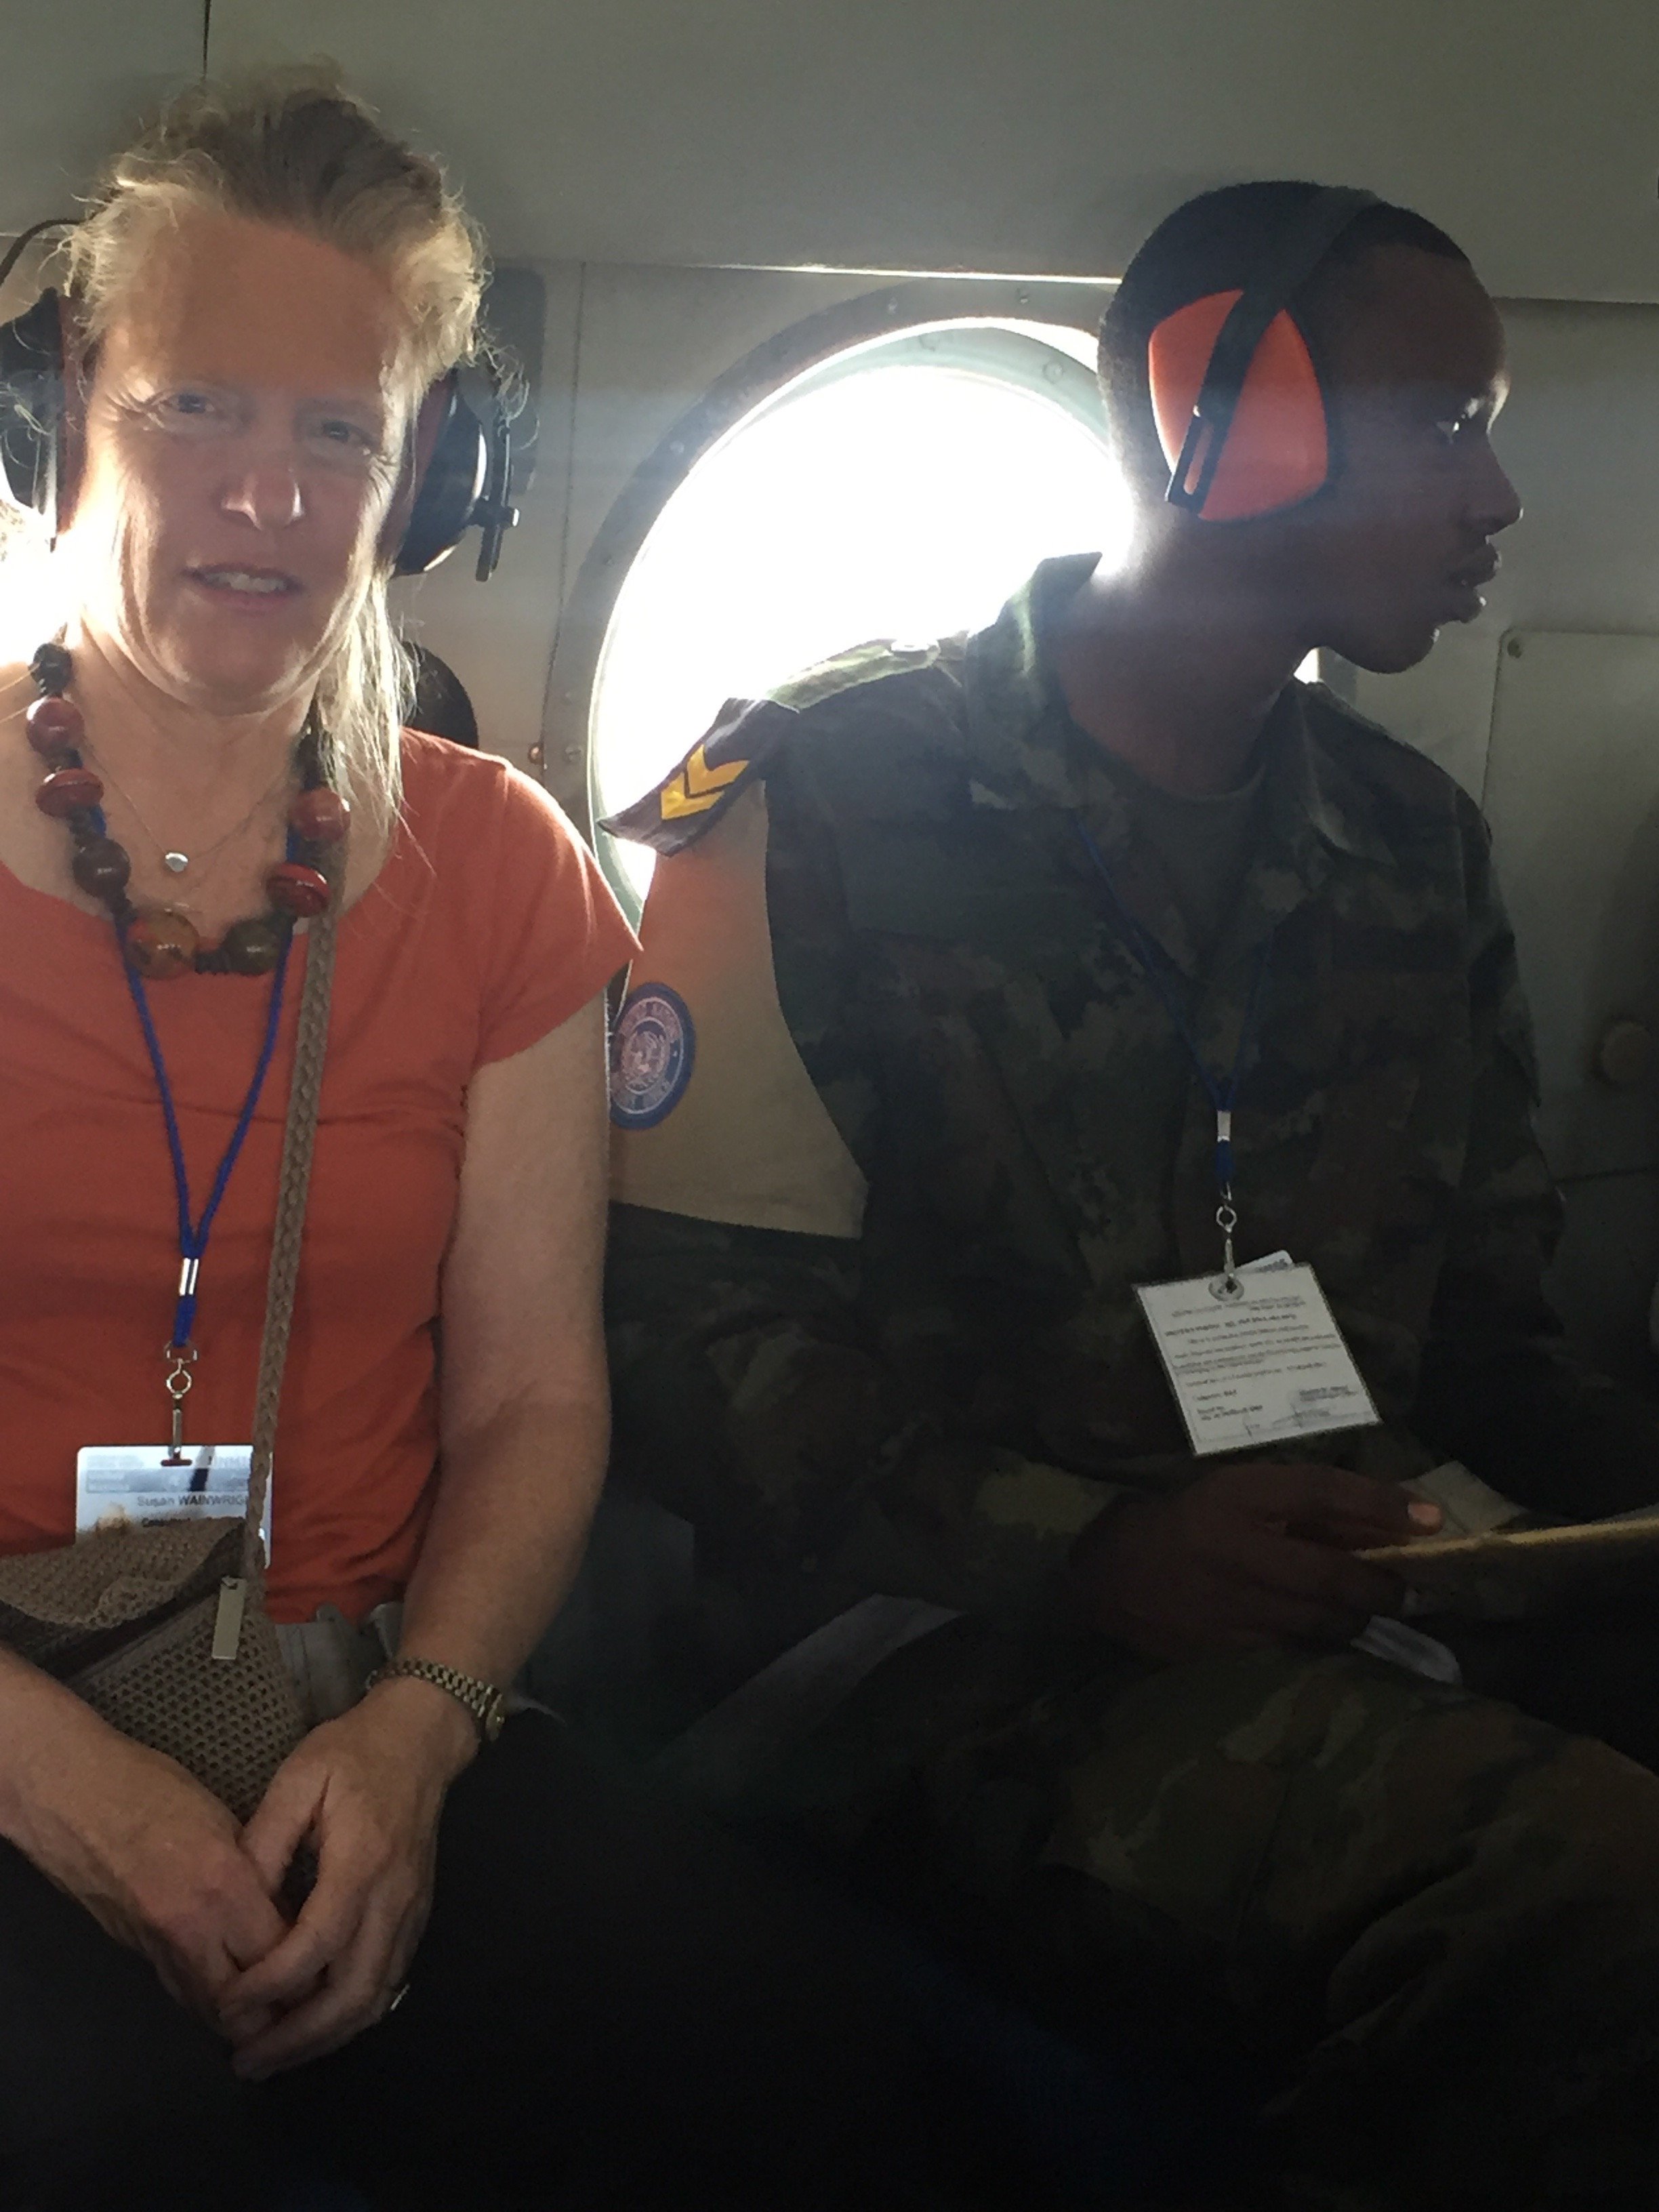 On a Russian army helicoptor in South Sudan. . .